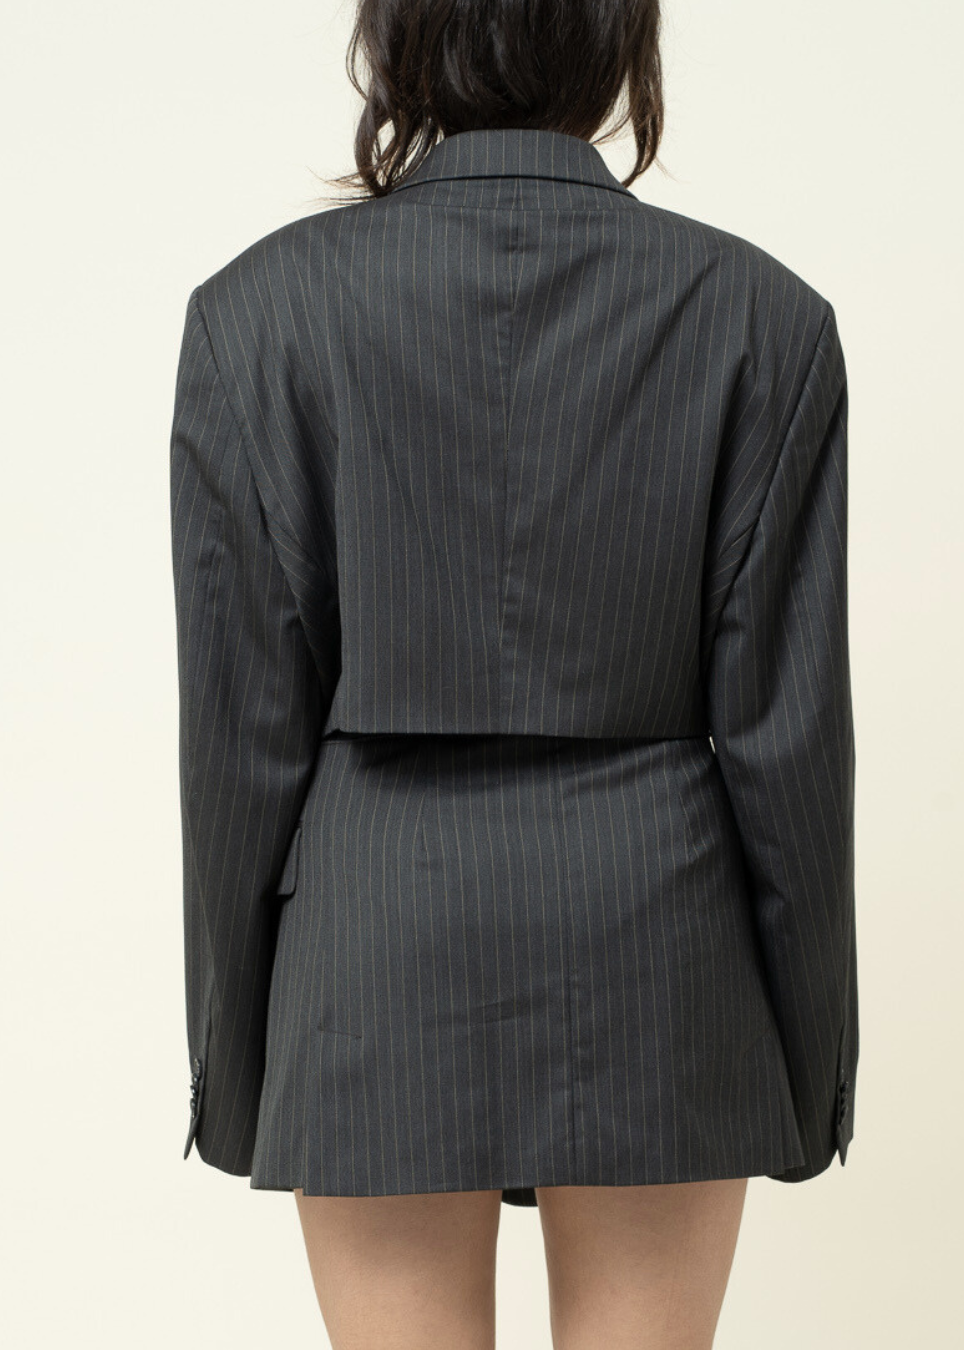 The Office Skirt Suit 